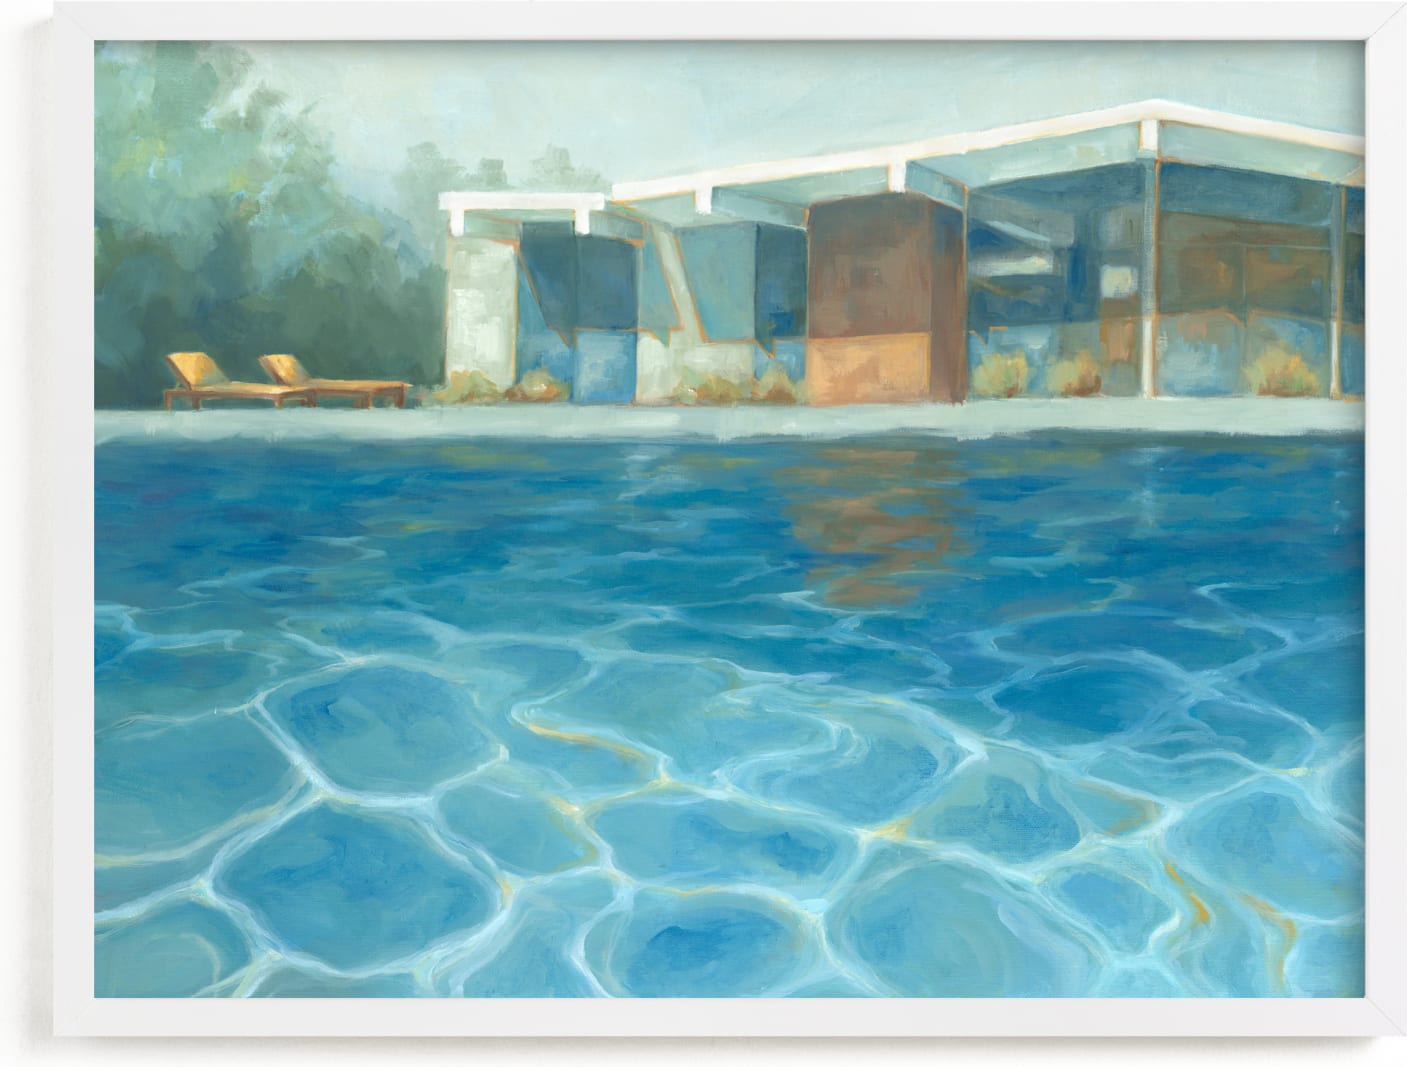 This is a blue art by Laura Browning called Eichler Summer.